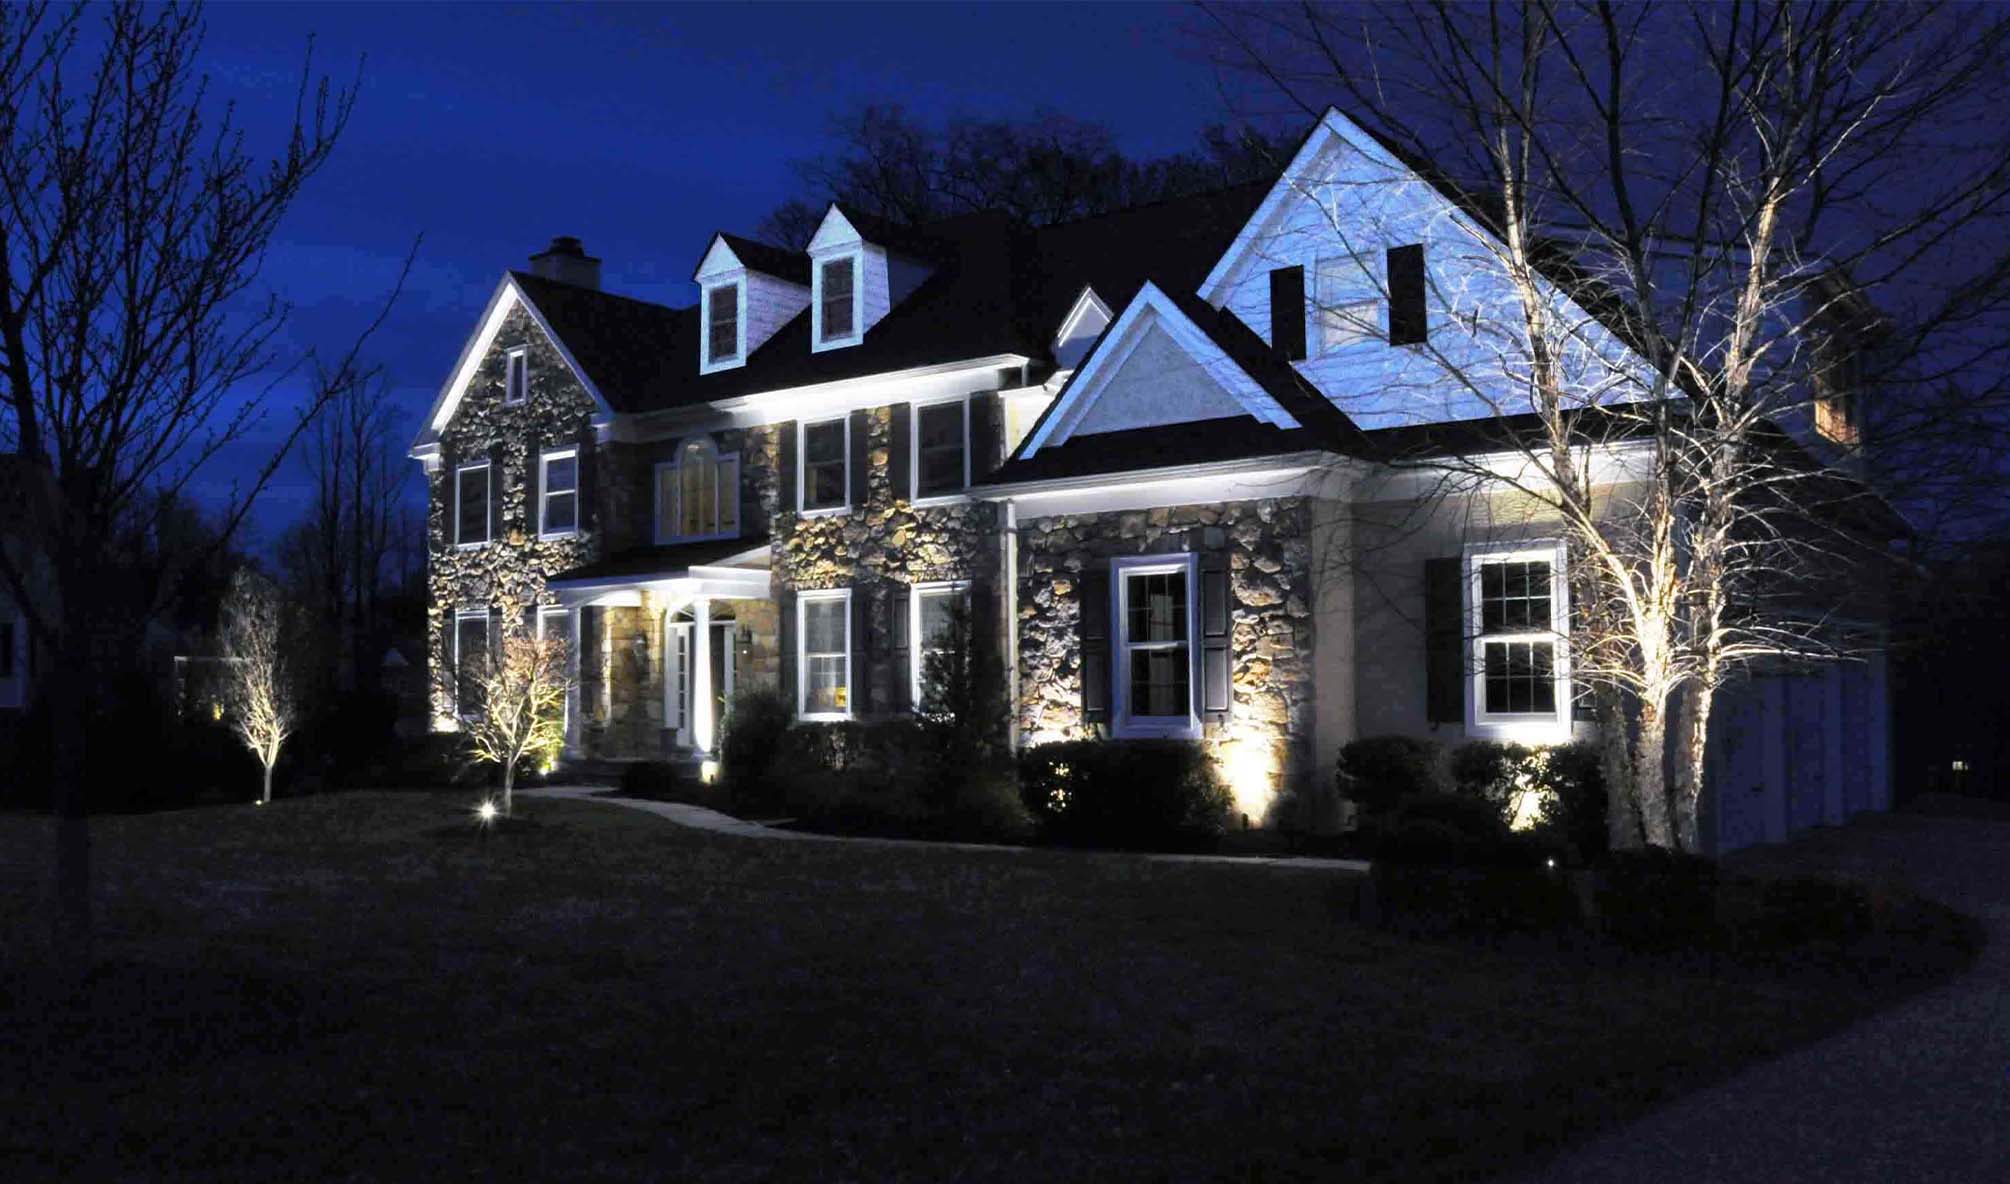 Hydroscapes Lighting On The Front Of A Home At Night